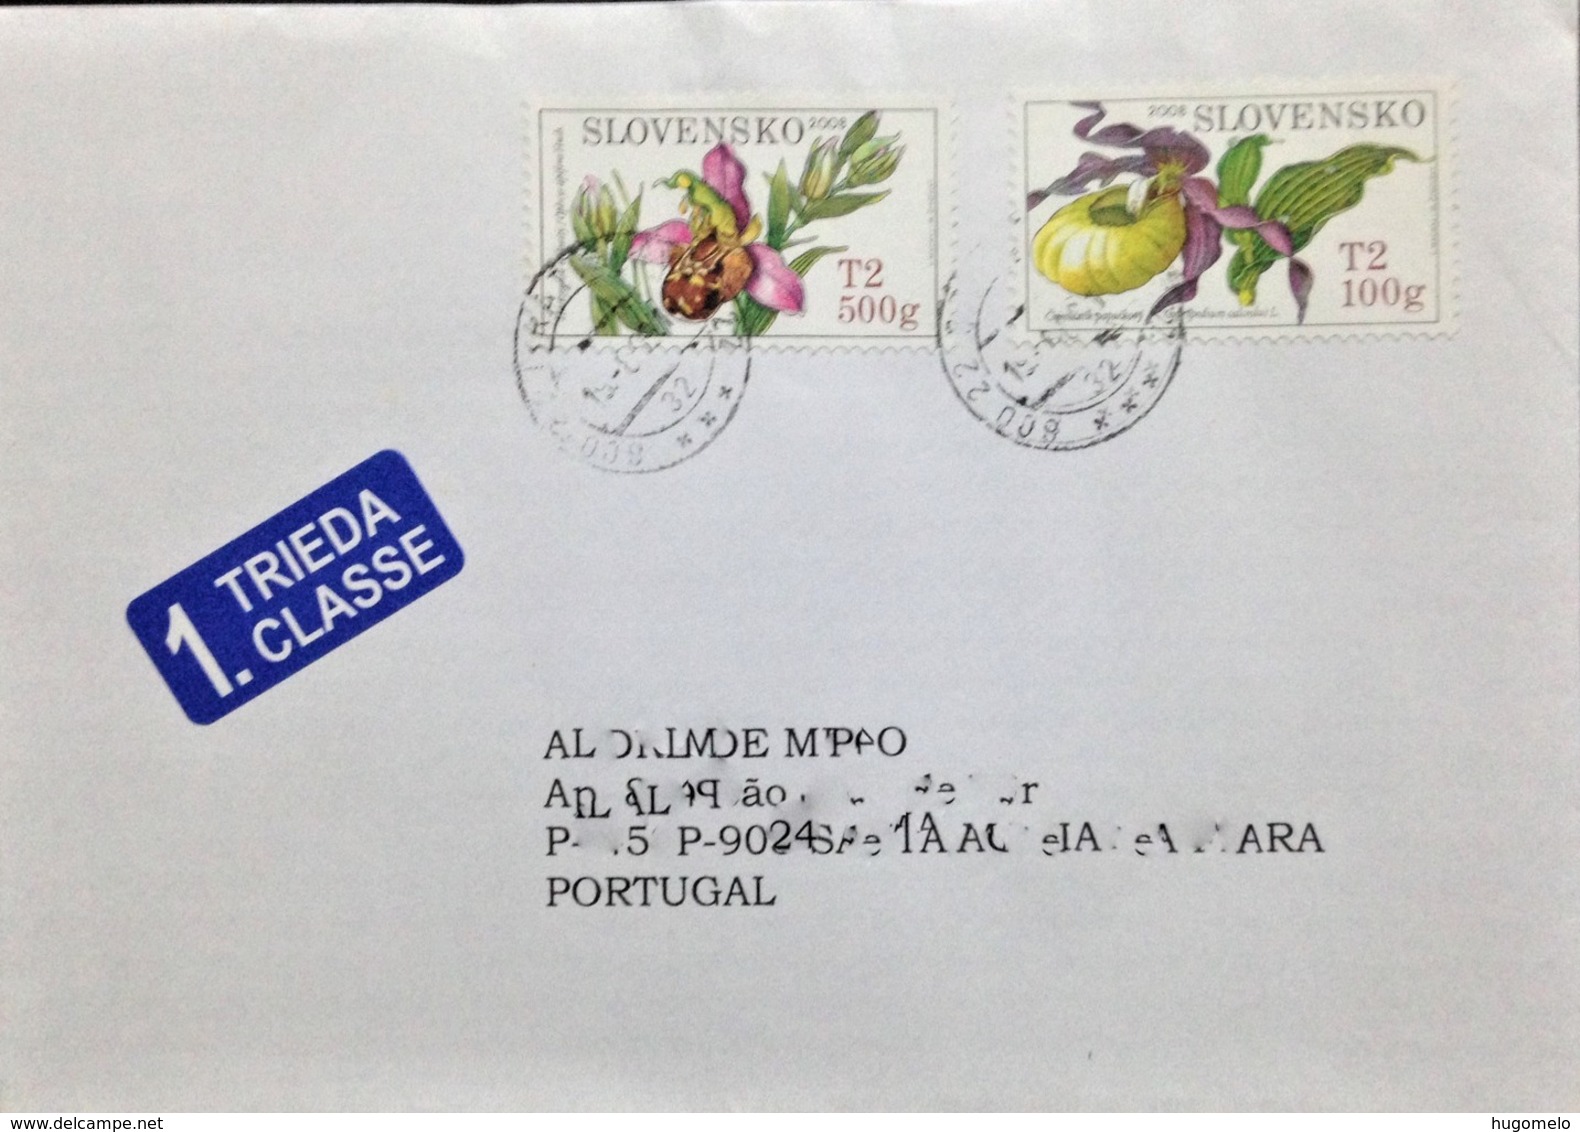 Slovakia, Circulated Cover To Portugal, "Nature", "Flora", Flowers", "Orchids", 2009 - Brieven En Documenten